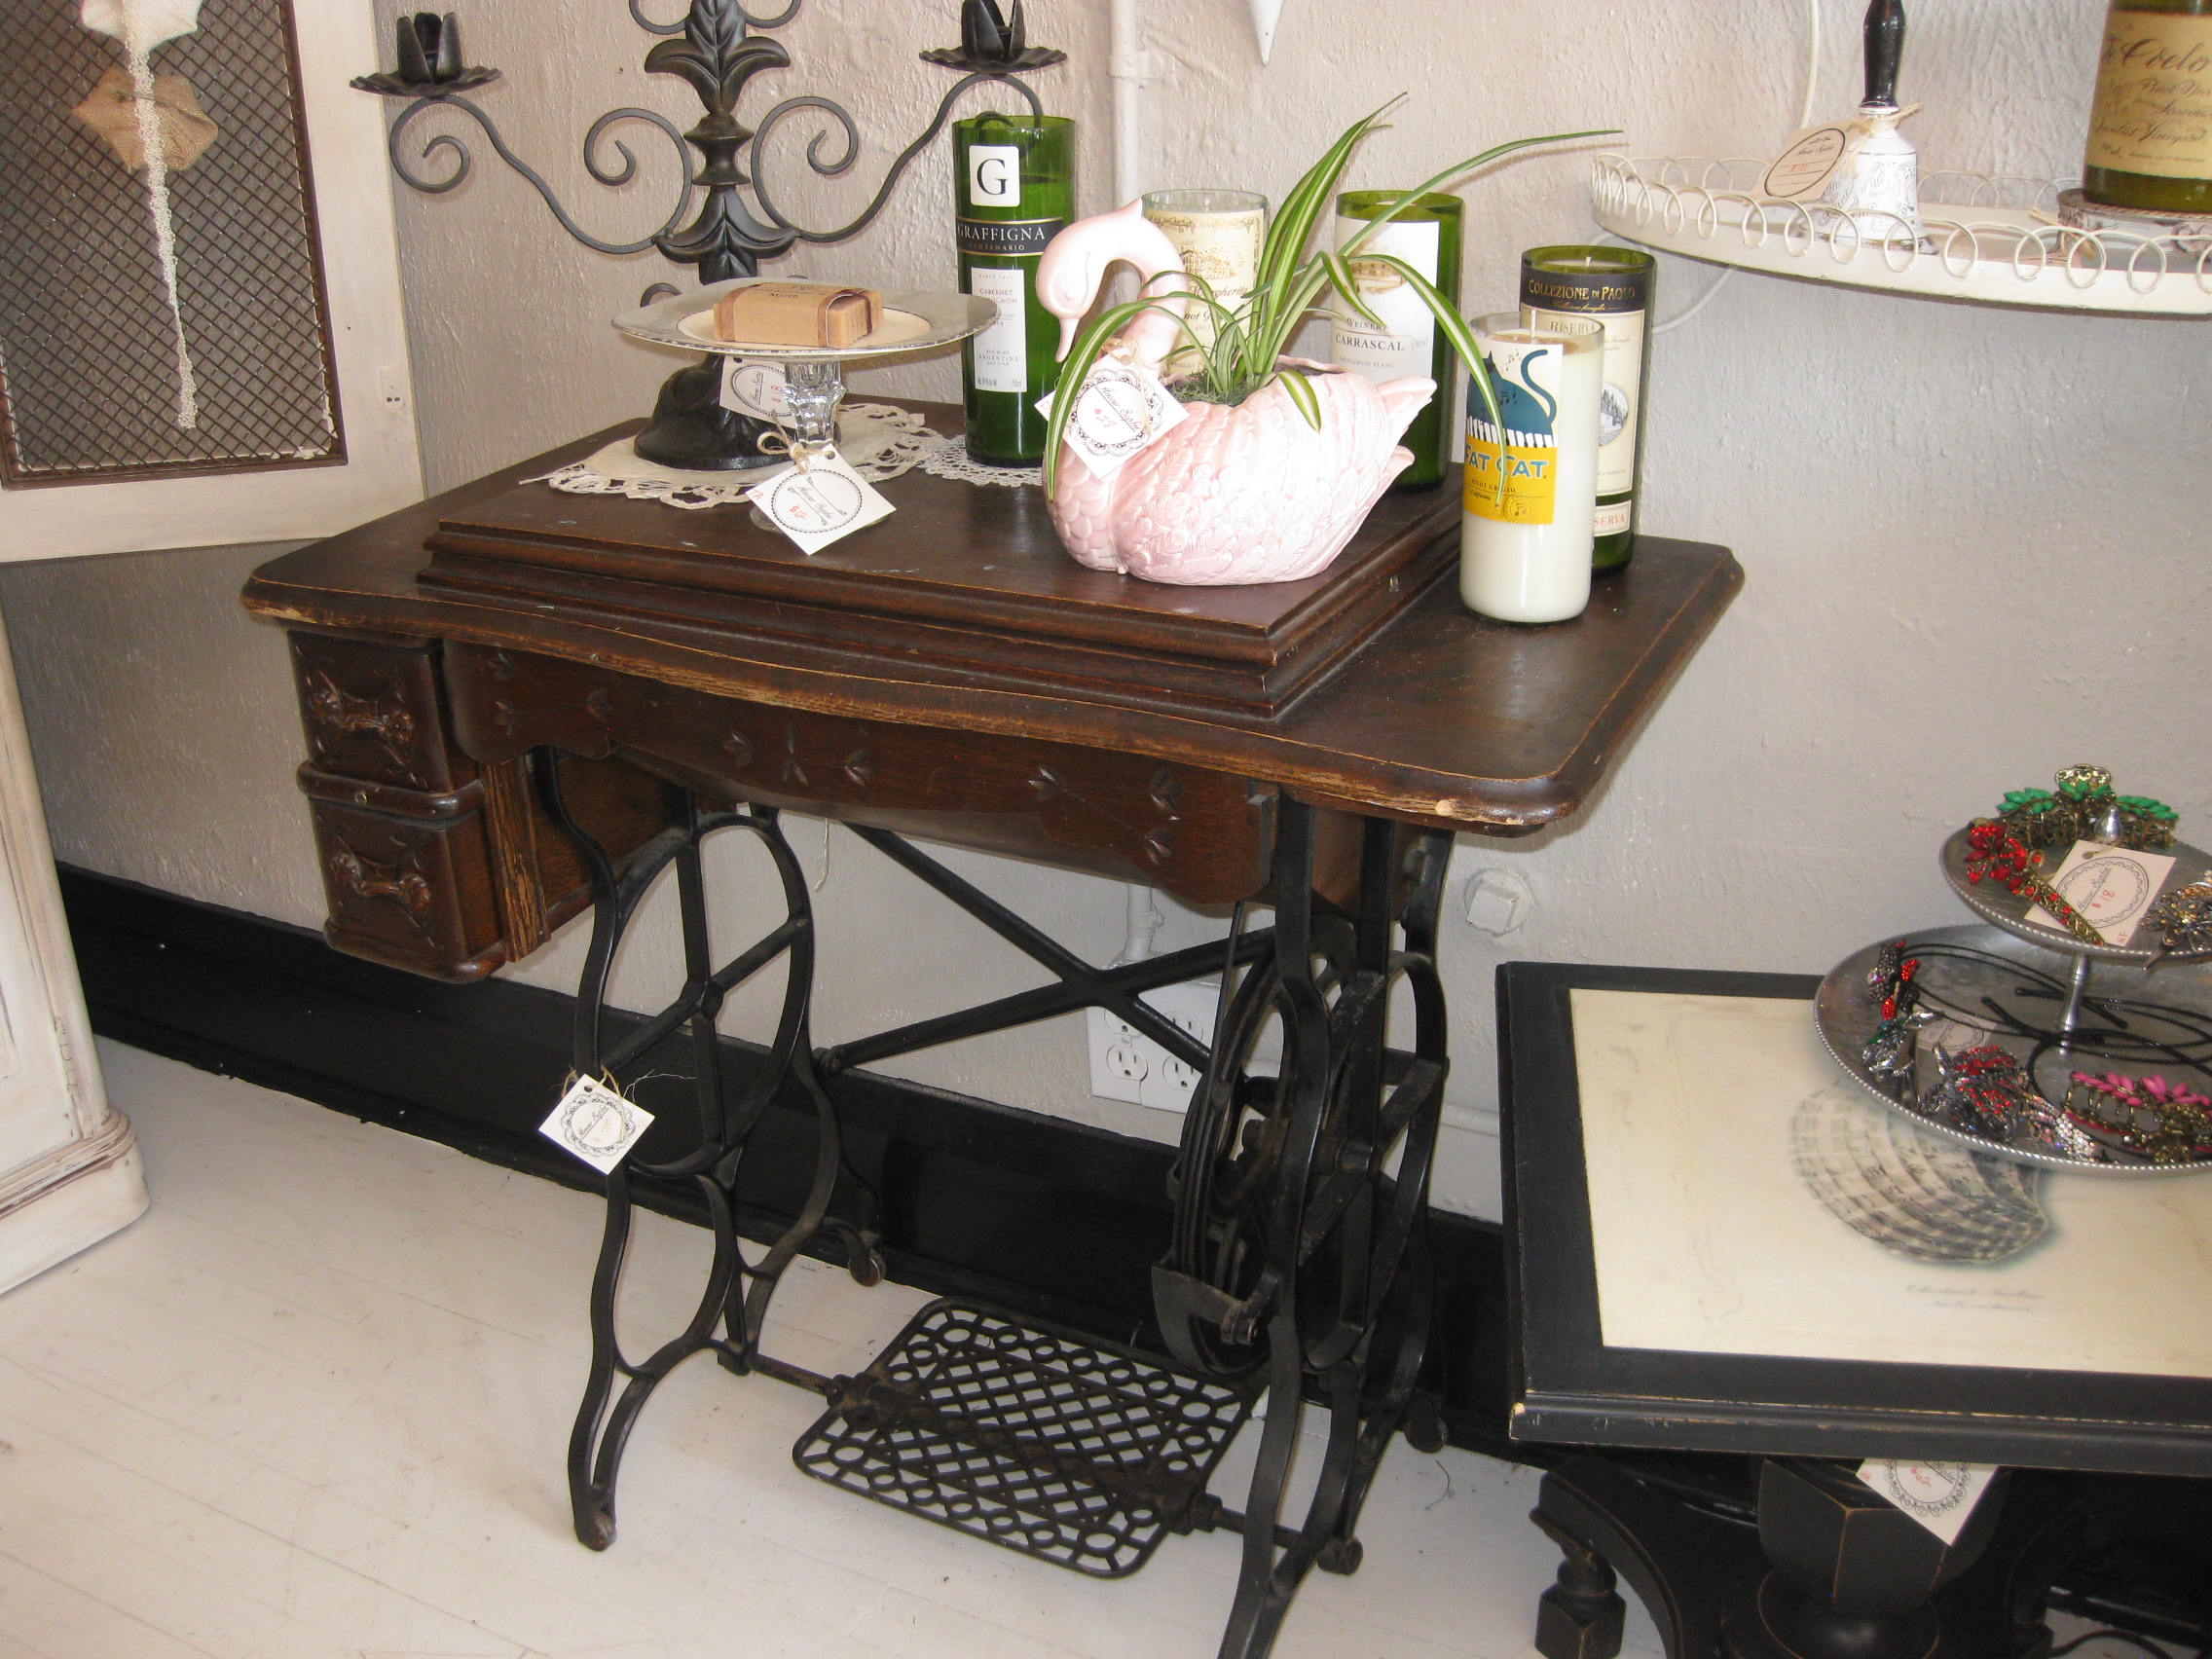 A classic sewing machine table - charming as is or ready to be refinished/repurposed